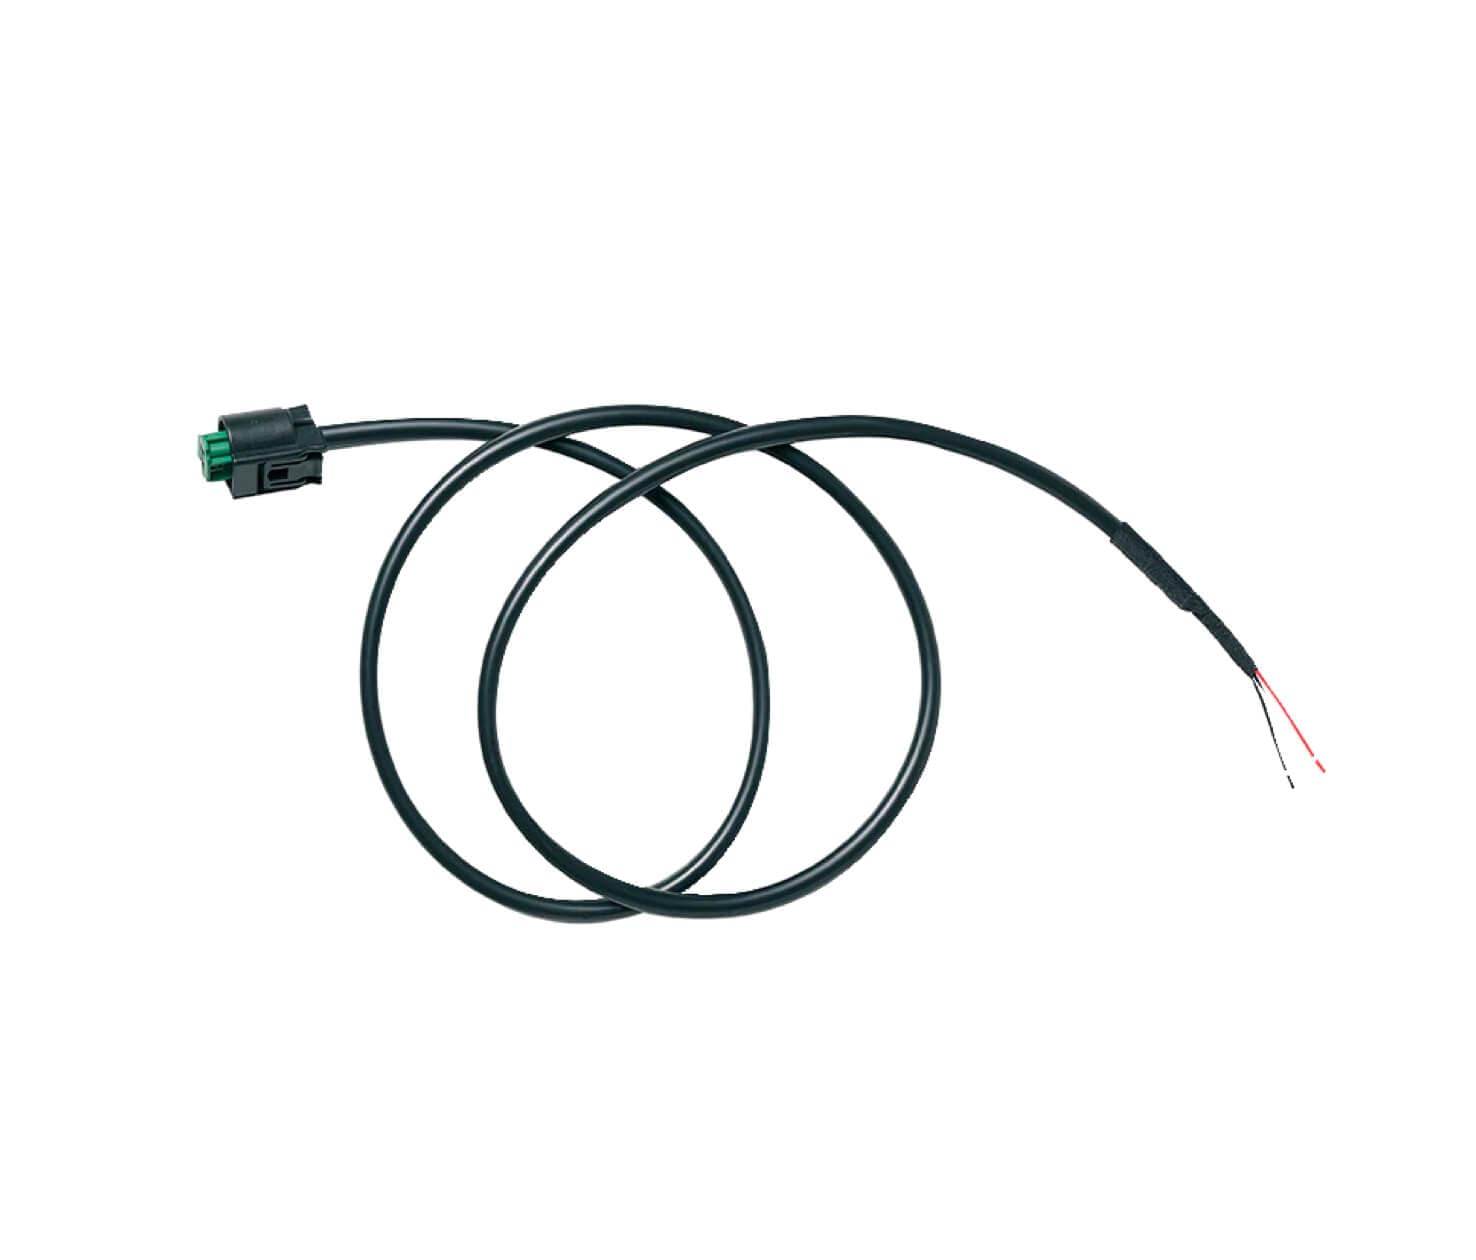 Tom Tom Rider BATTERY CABLE 2015 product code 0049UGE00104 